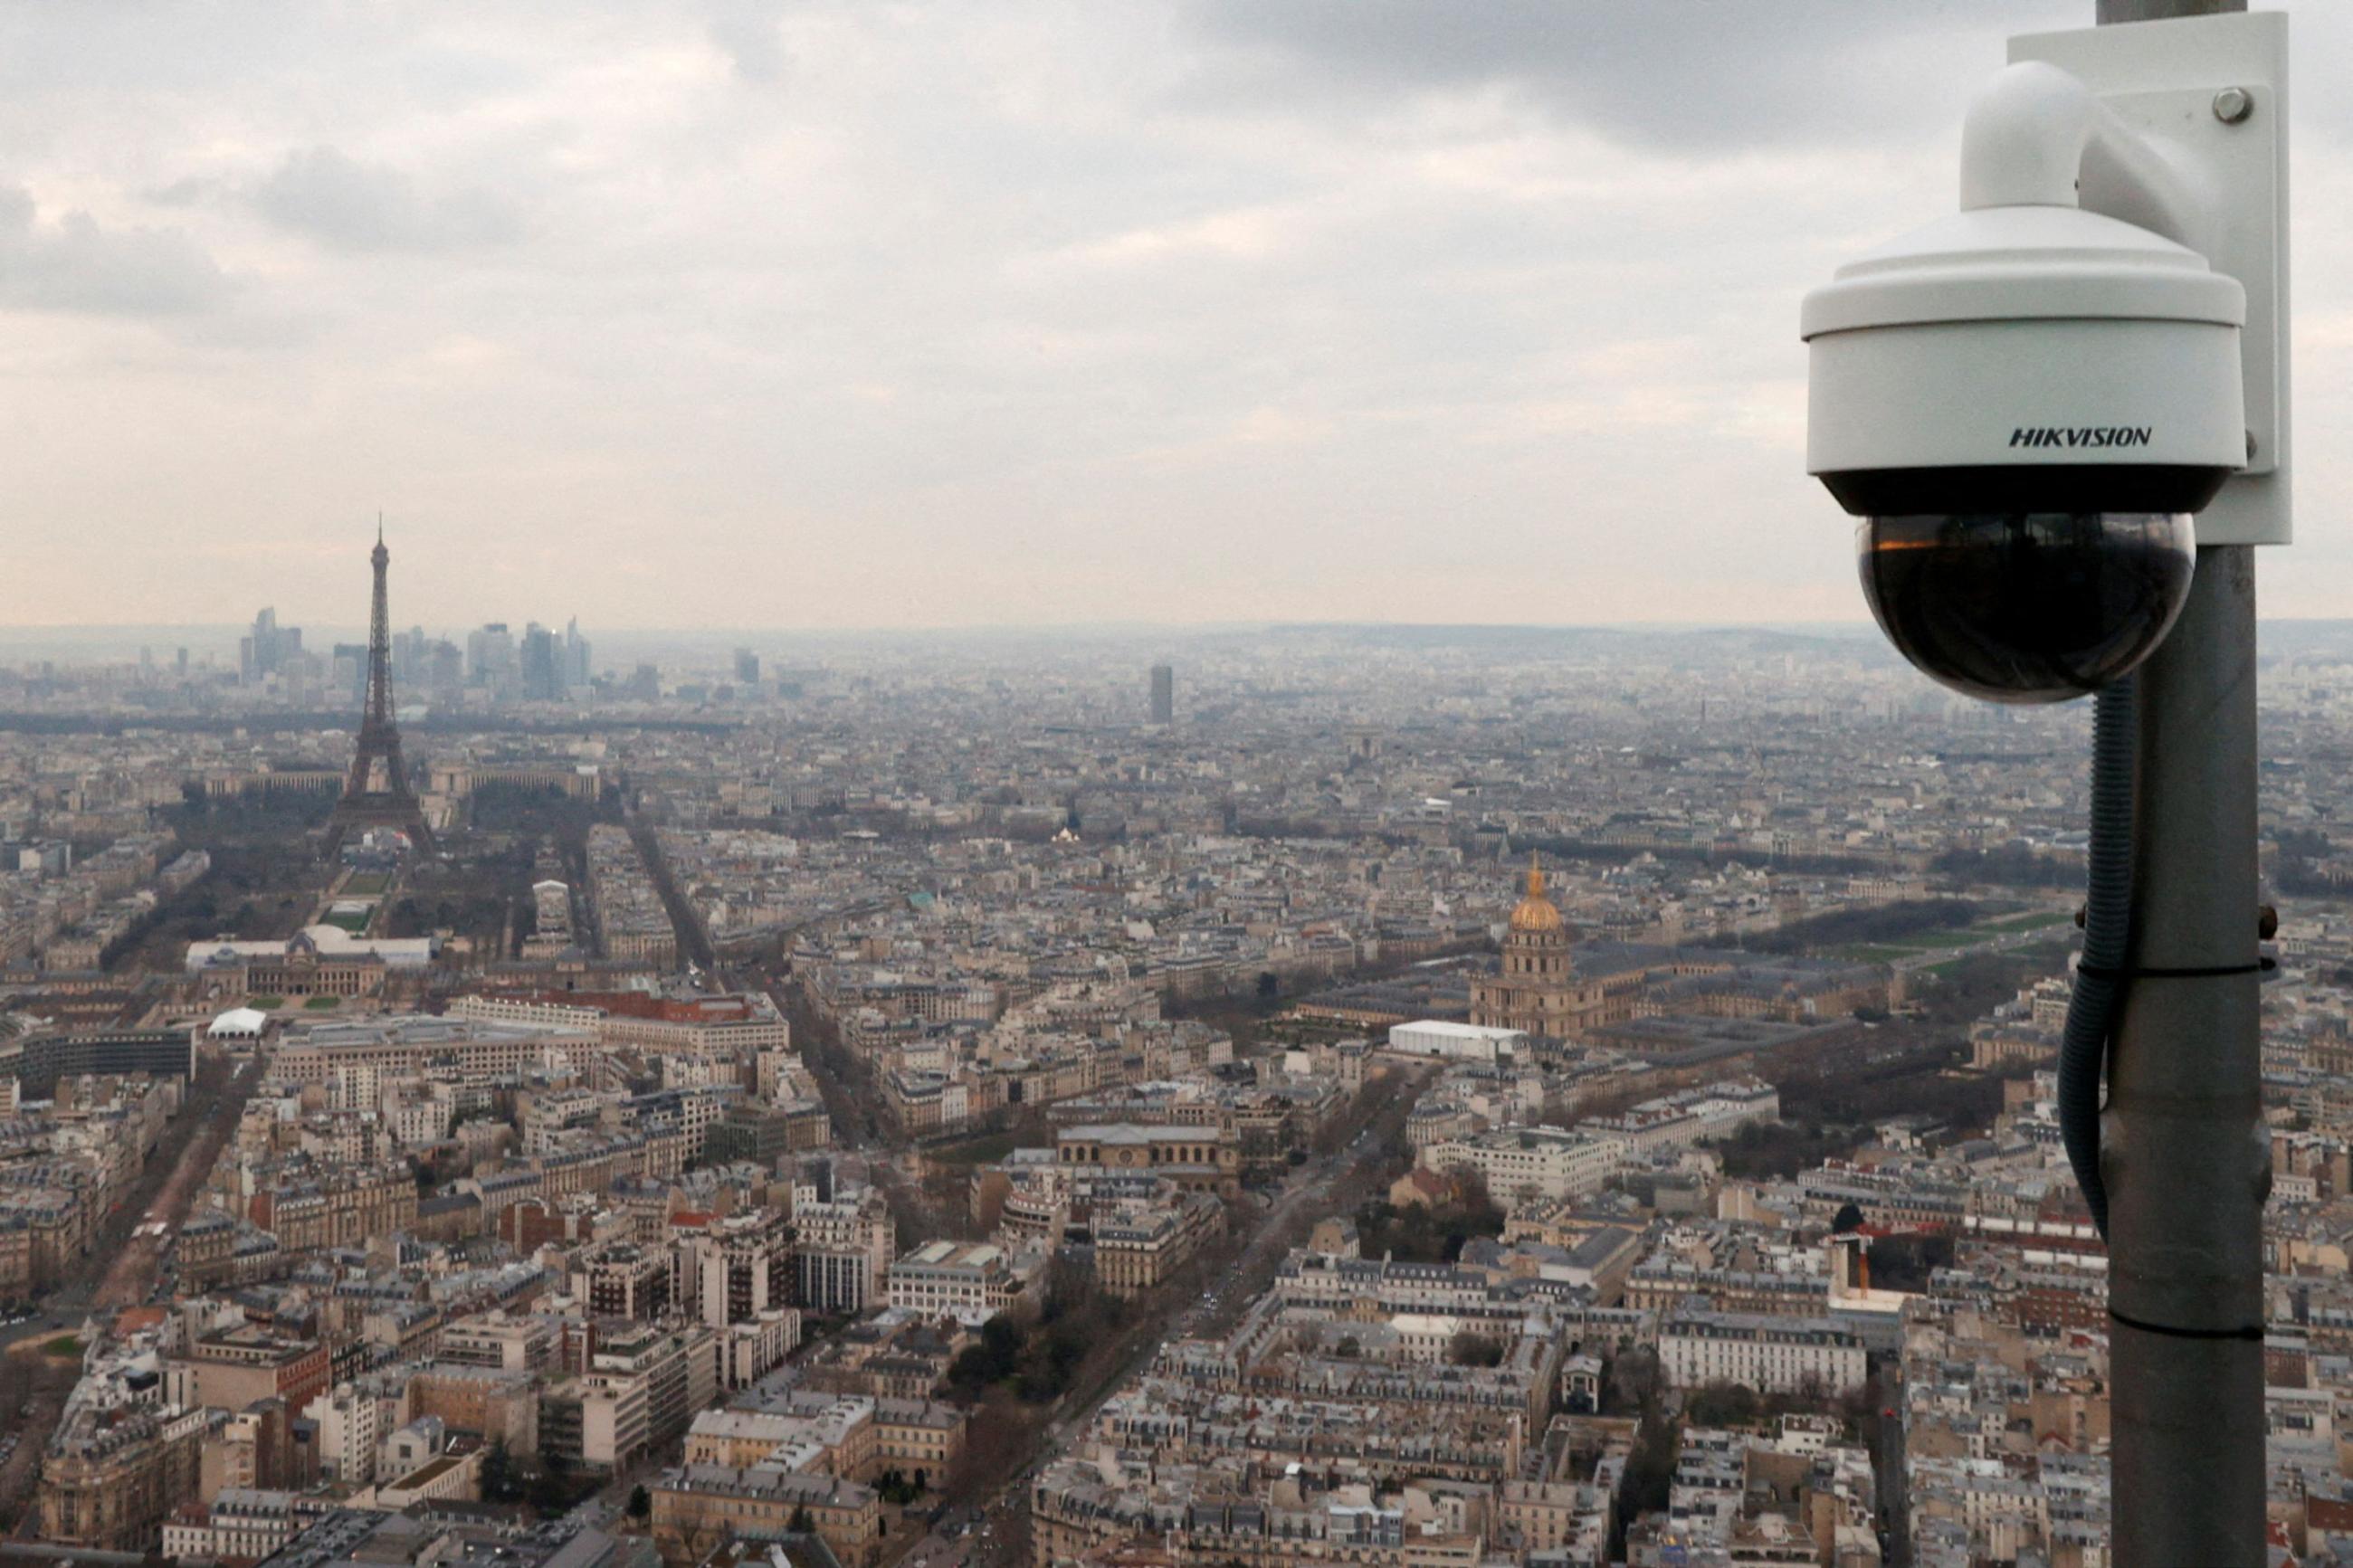 A view shows a surveillance camera as French police start to test artificial intelligence-assisted video surveillance of crowds in the run-up to the Olympics in Paris, France, March 6, 2024.